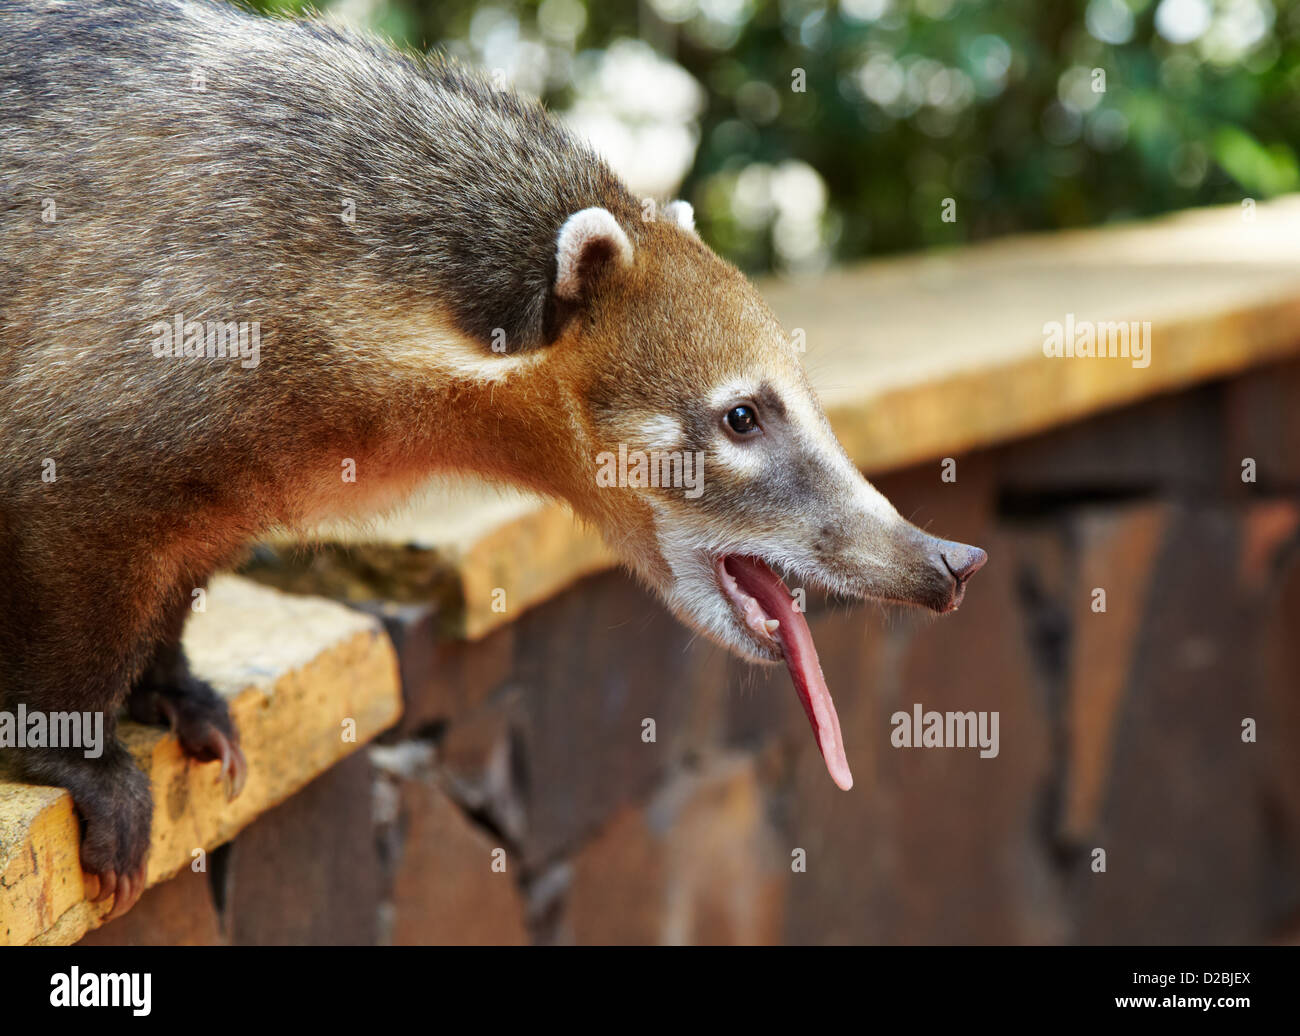 Coati at Iguazu Falls comes to people and begs for food Stock Photo